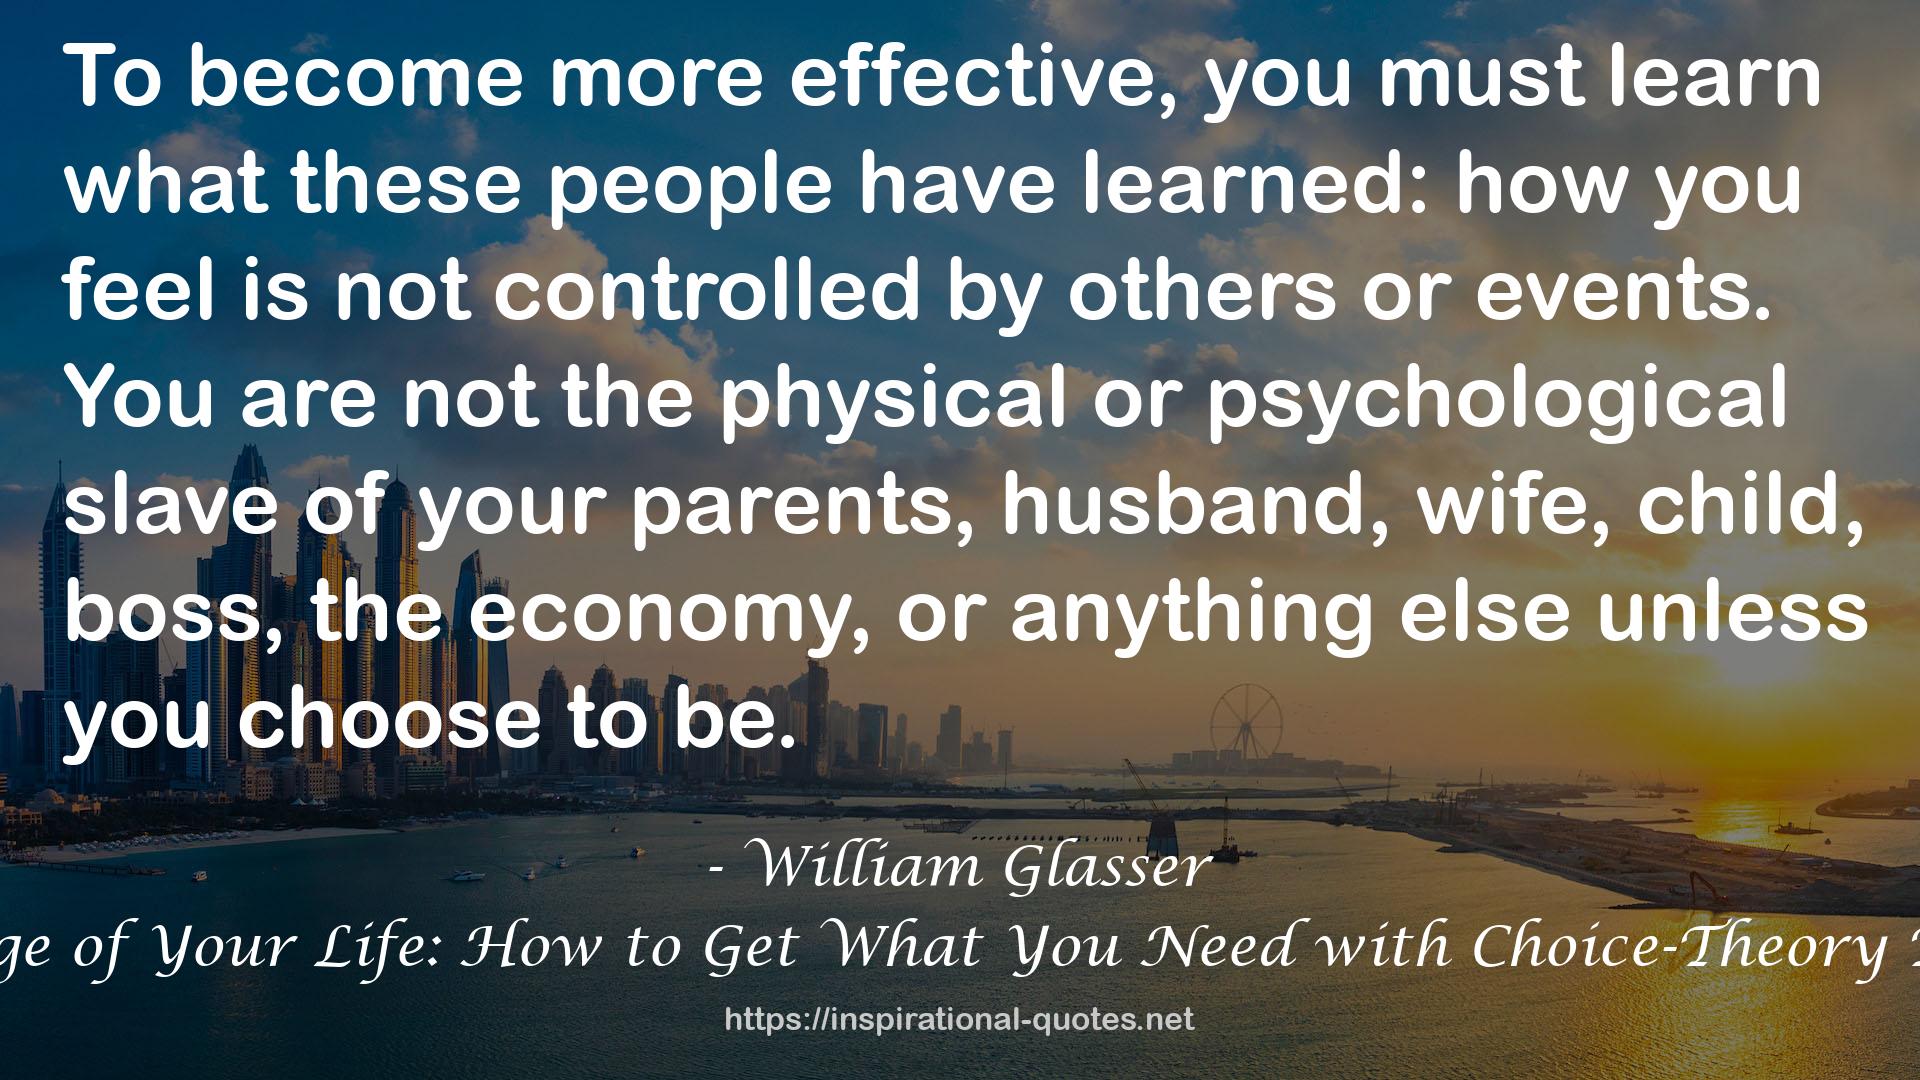 Take Charge of Your Life: How to Get What You Need with Choice-Theory Psychology QUOTES